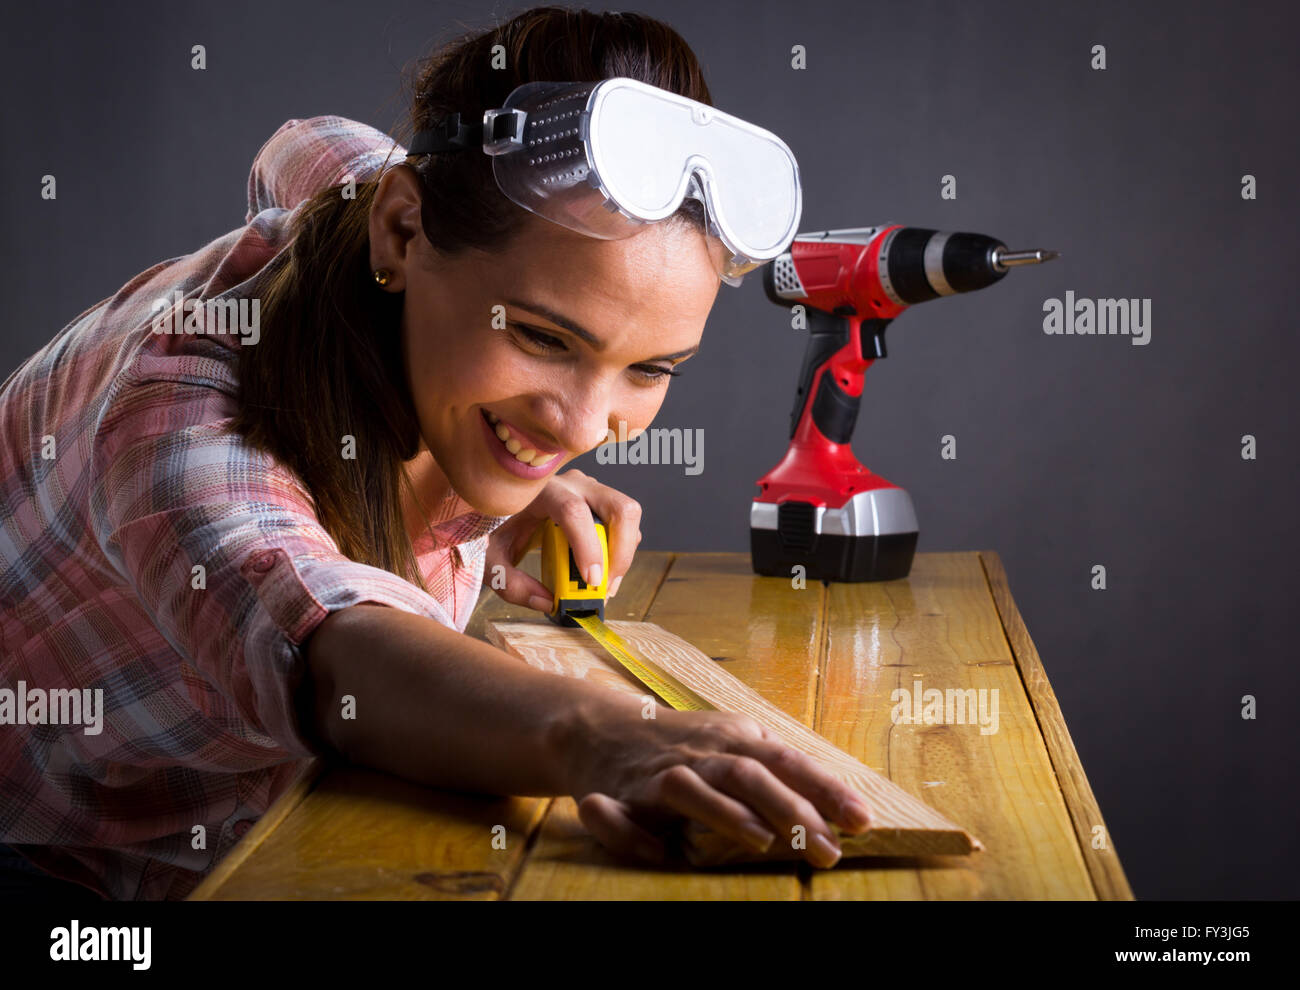 Young adult Hispanic woman measuring a wooden board with a tape measure Stock Photo